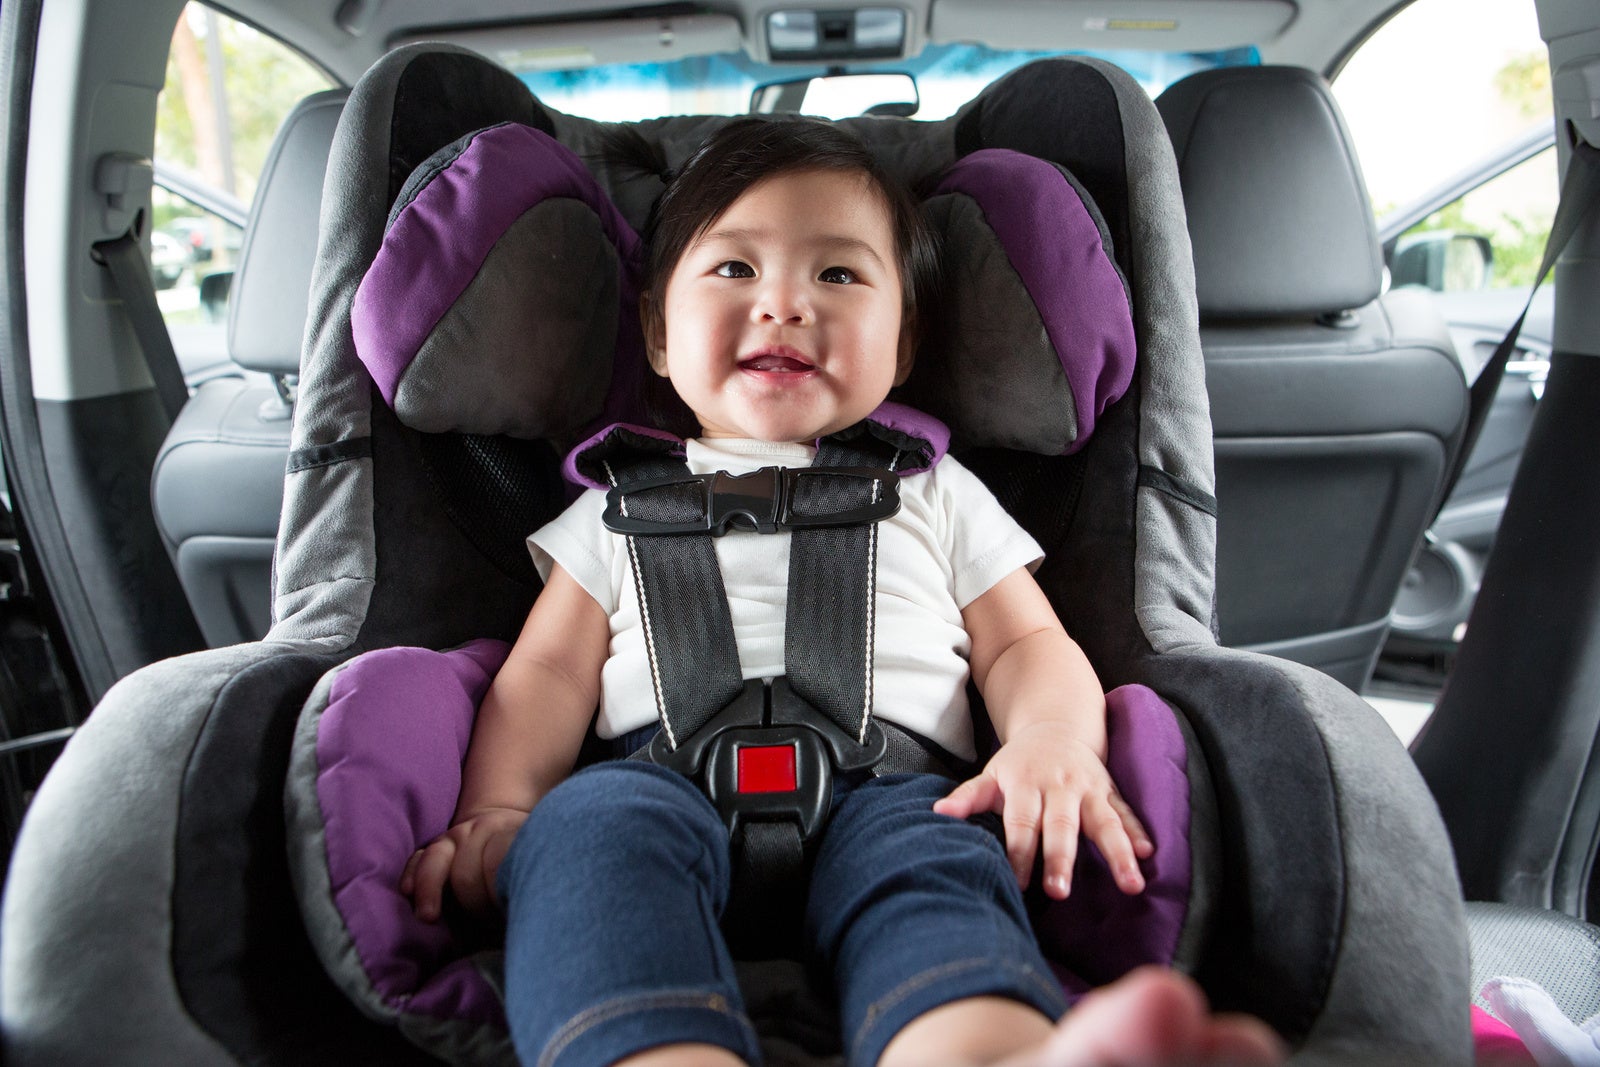 Child Car Seat Laws In The Uk Cargurus Co - What Is The Law On Infant Car Seats